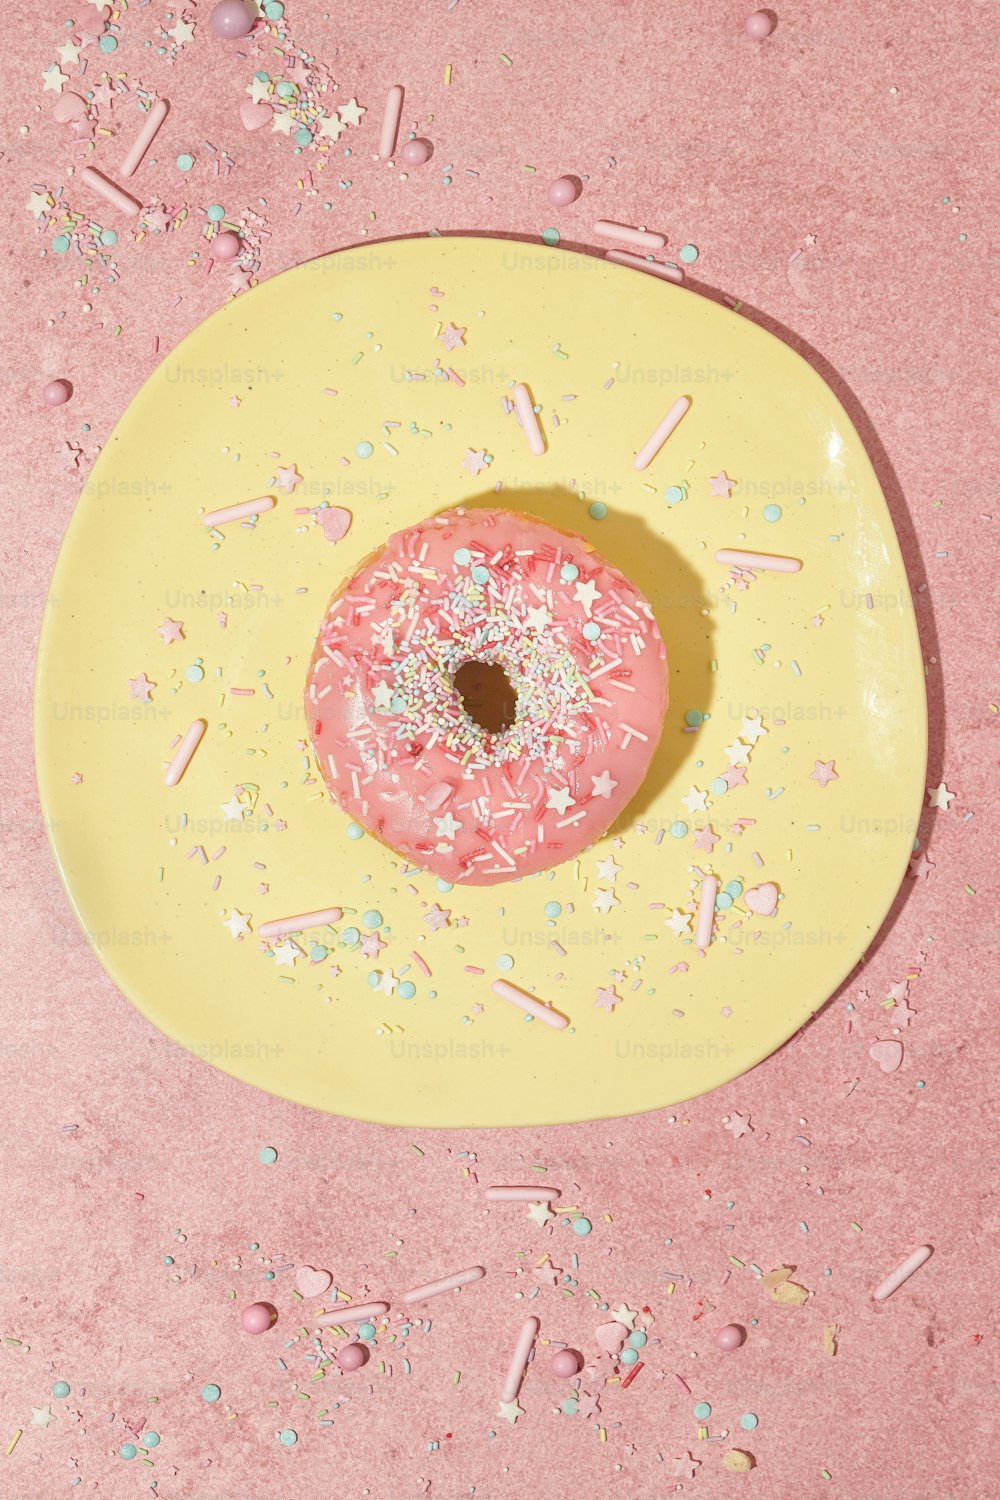 a pink donut with sprinkles on a yellow plate